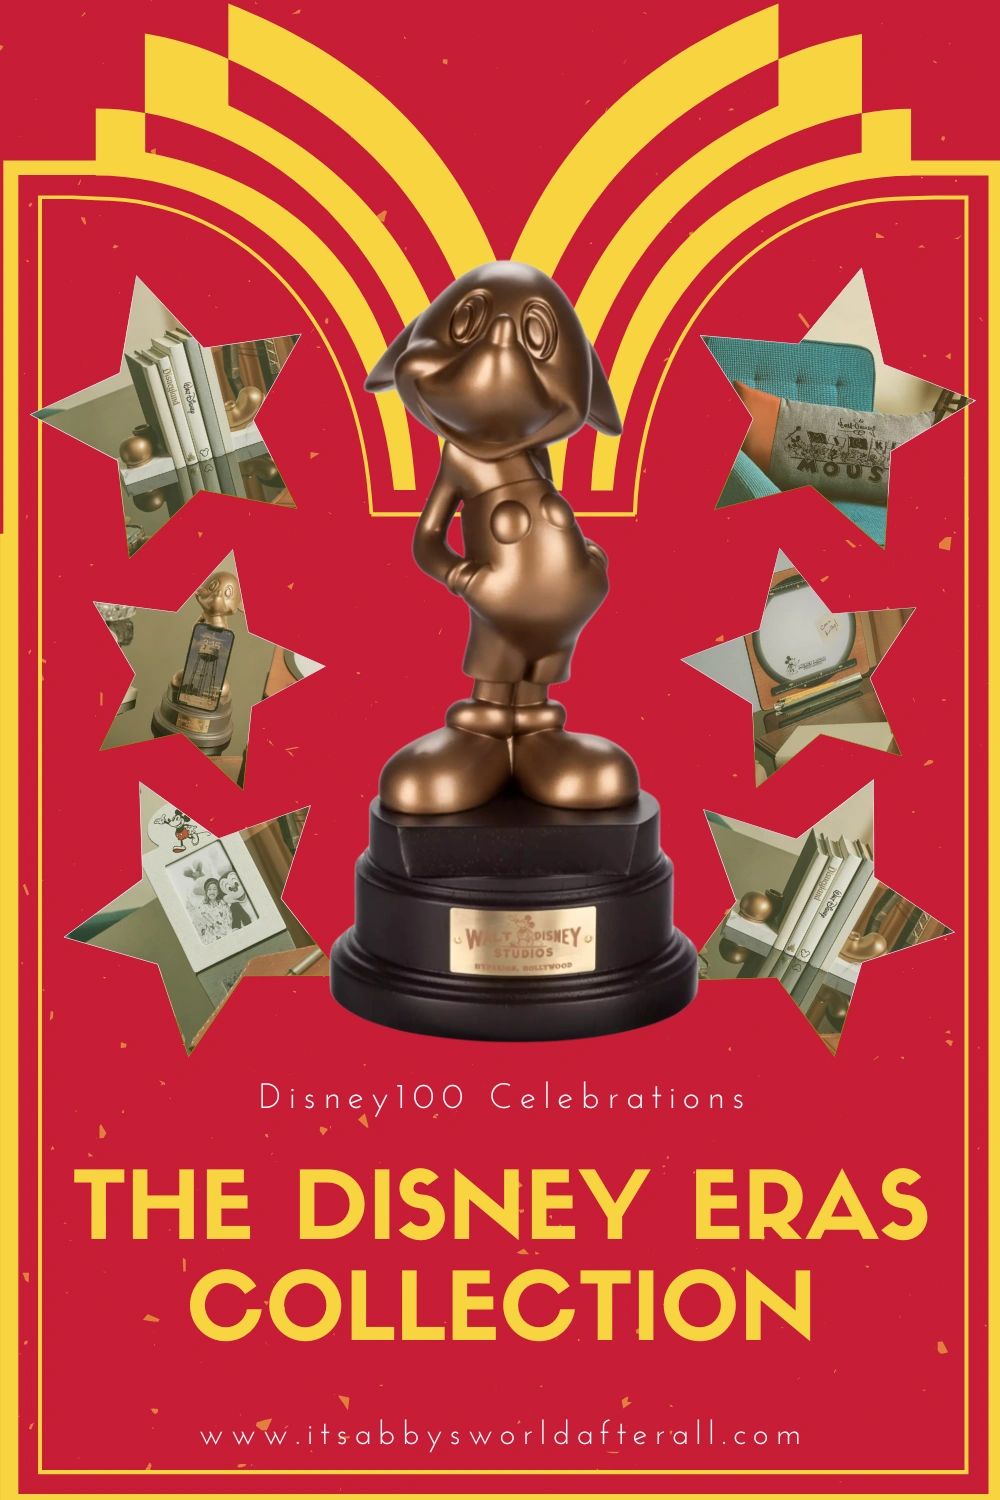 Disney100 Celebrations Collections - The Disney Eras Collection